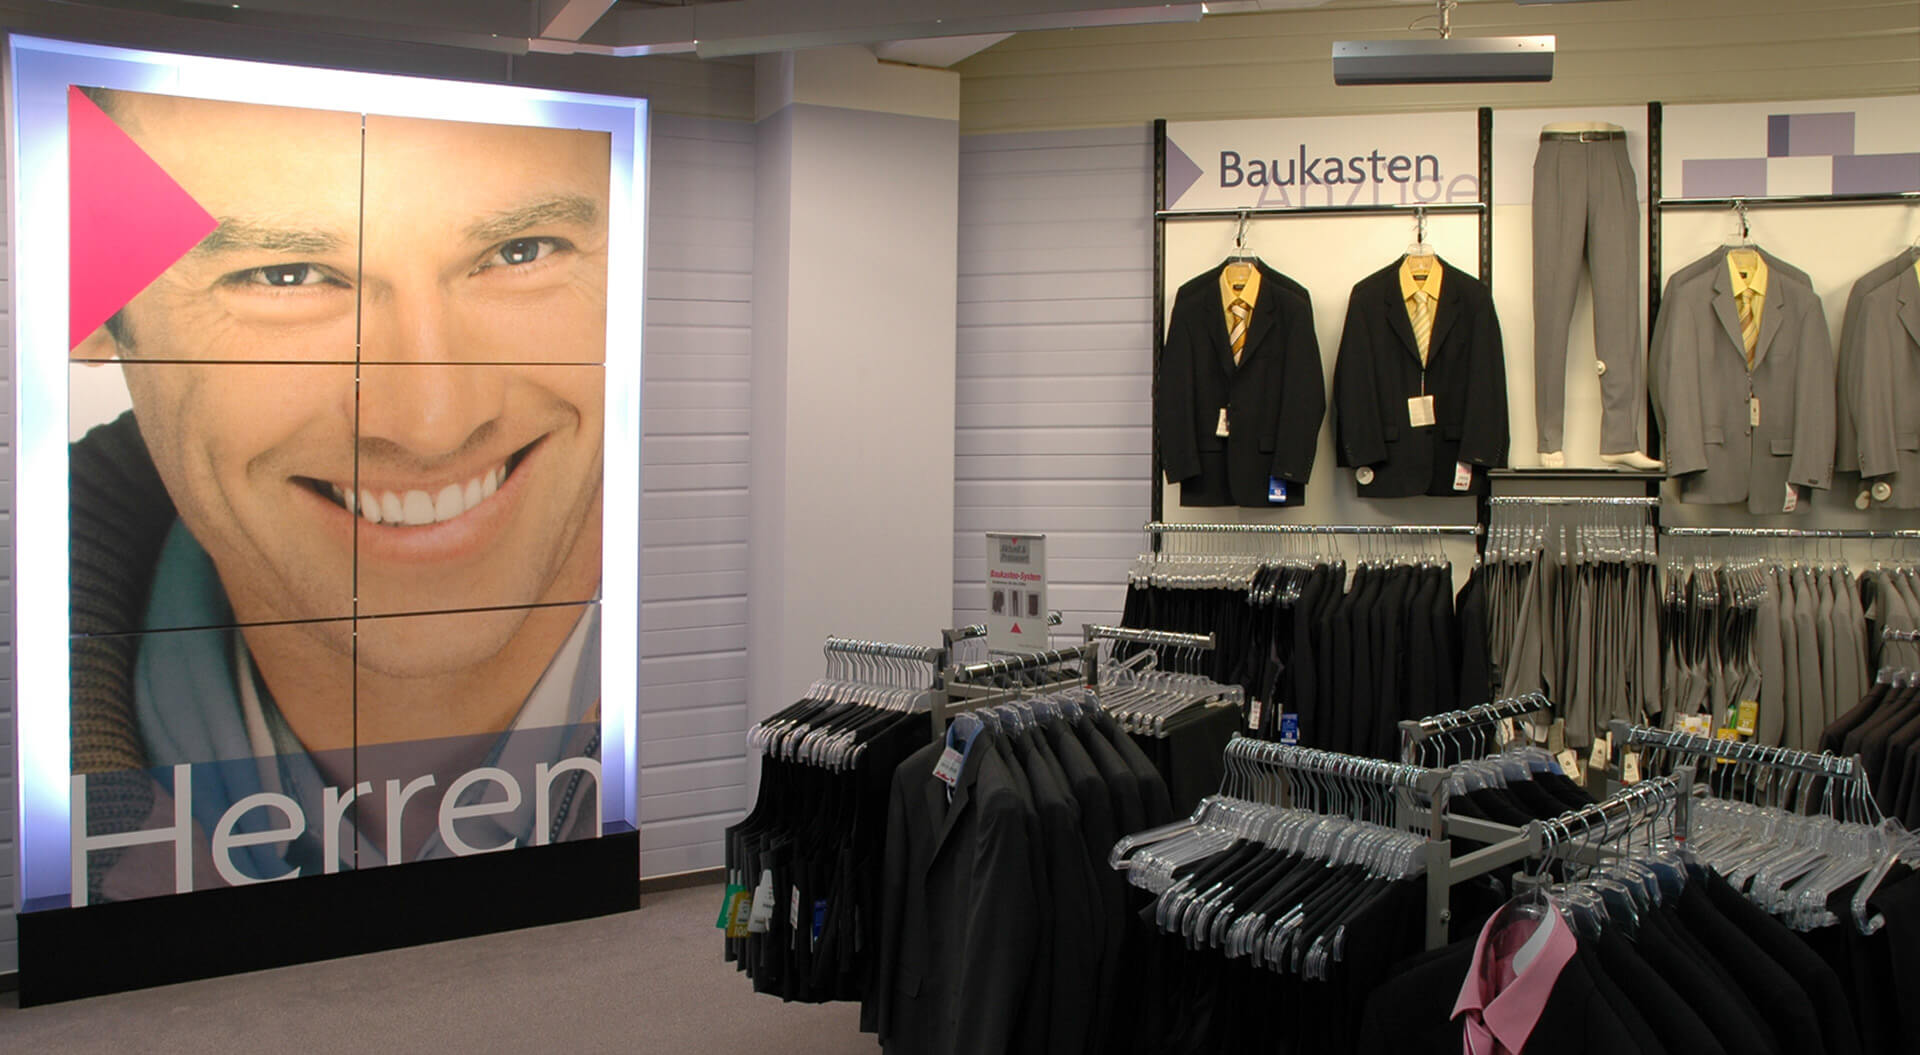  Adler Fashion Store Germany retail store interior design and department branding for mens wear jackets